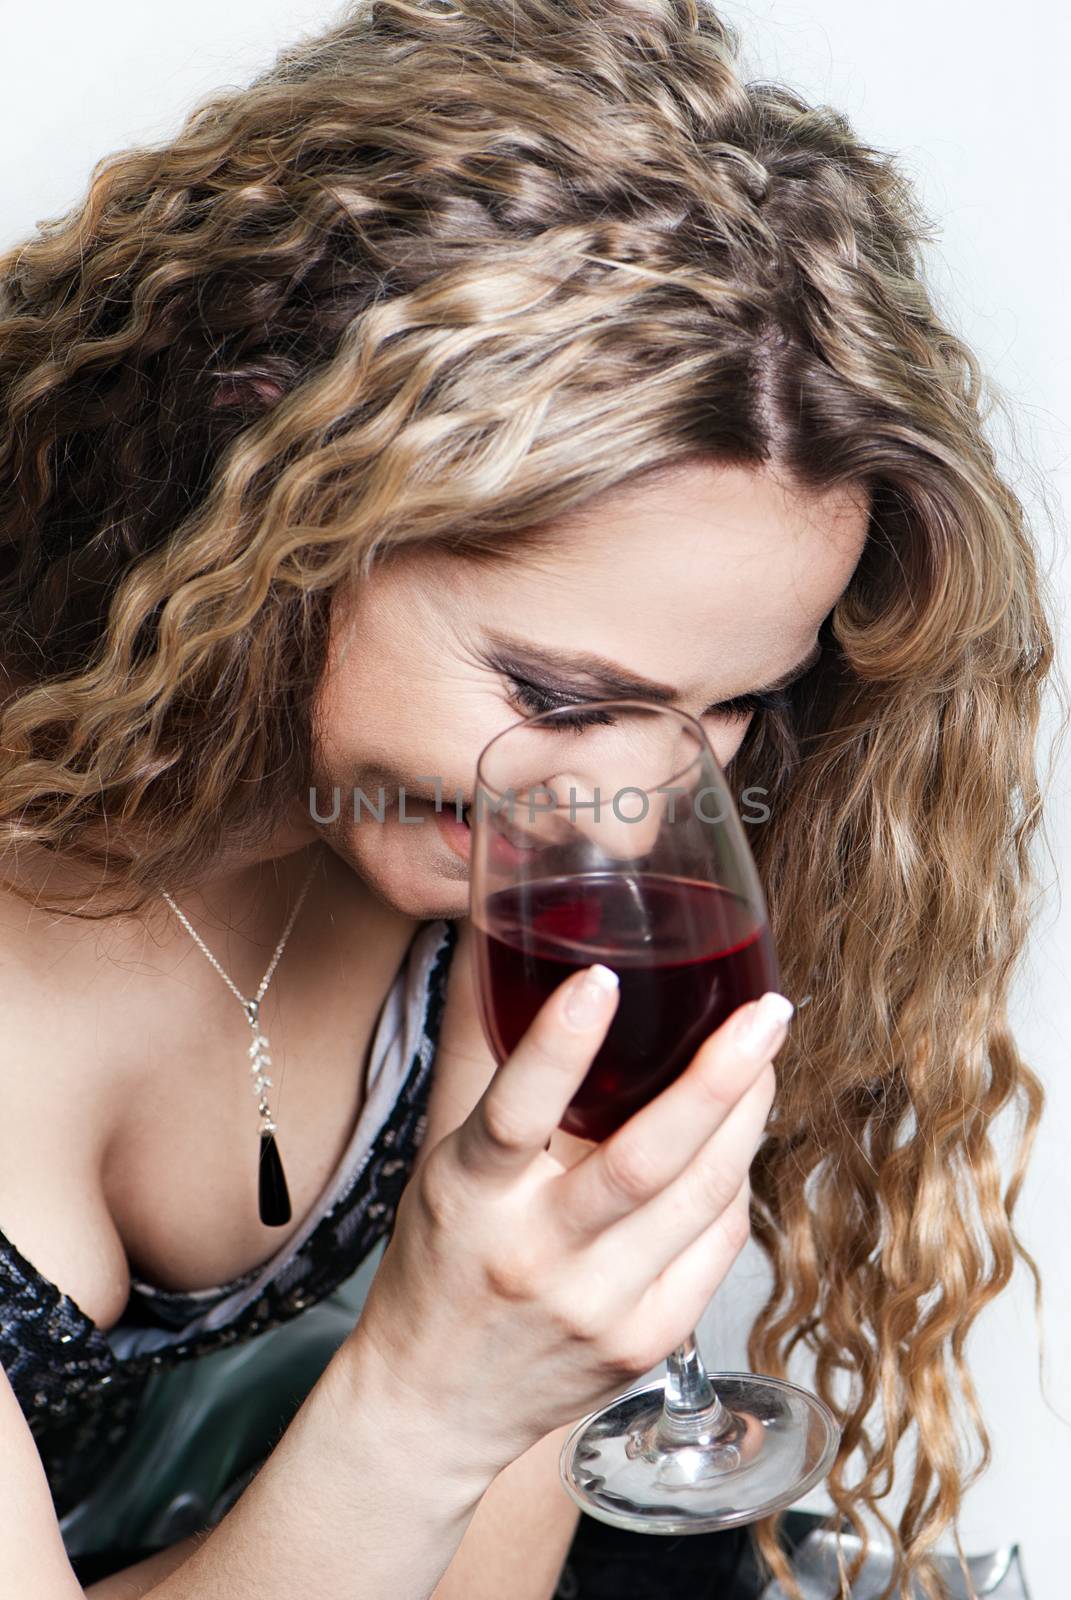 Beautiful caucasian woman with a red wine glass. by Anpet2000